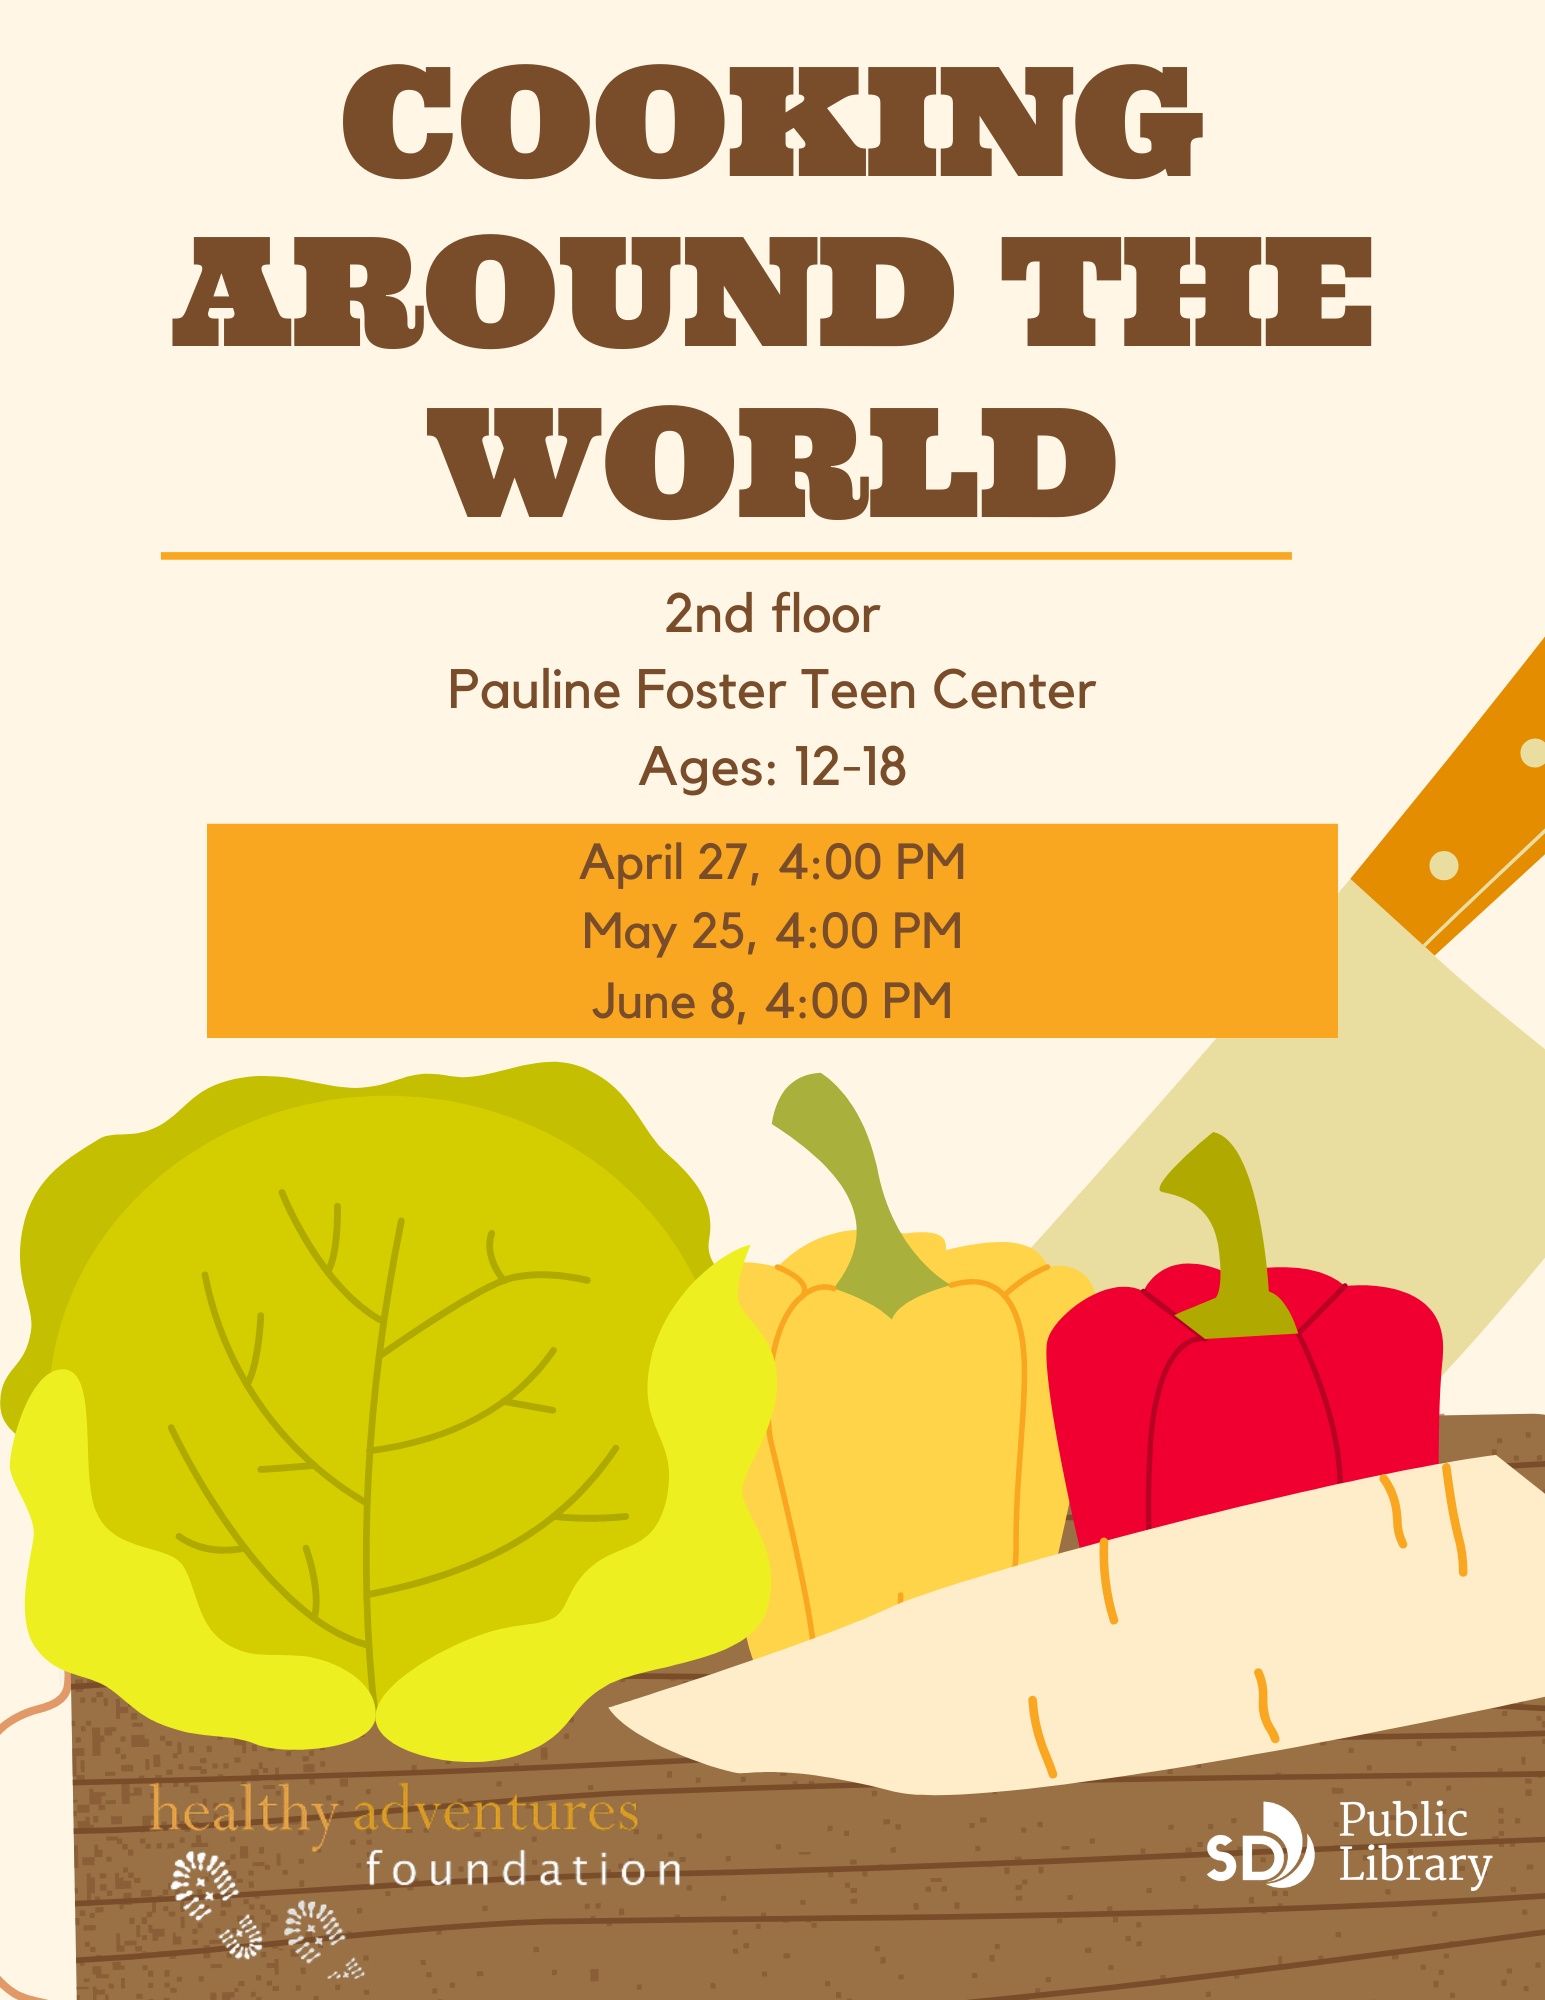 Cooking Around the World. 2nd floor, Pauline Foster Teen Center, Ages 12-18. April 27, May 25, June 8 at 4pm.